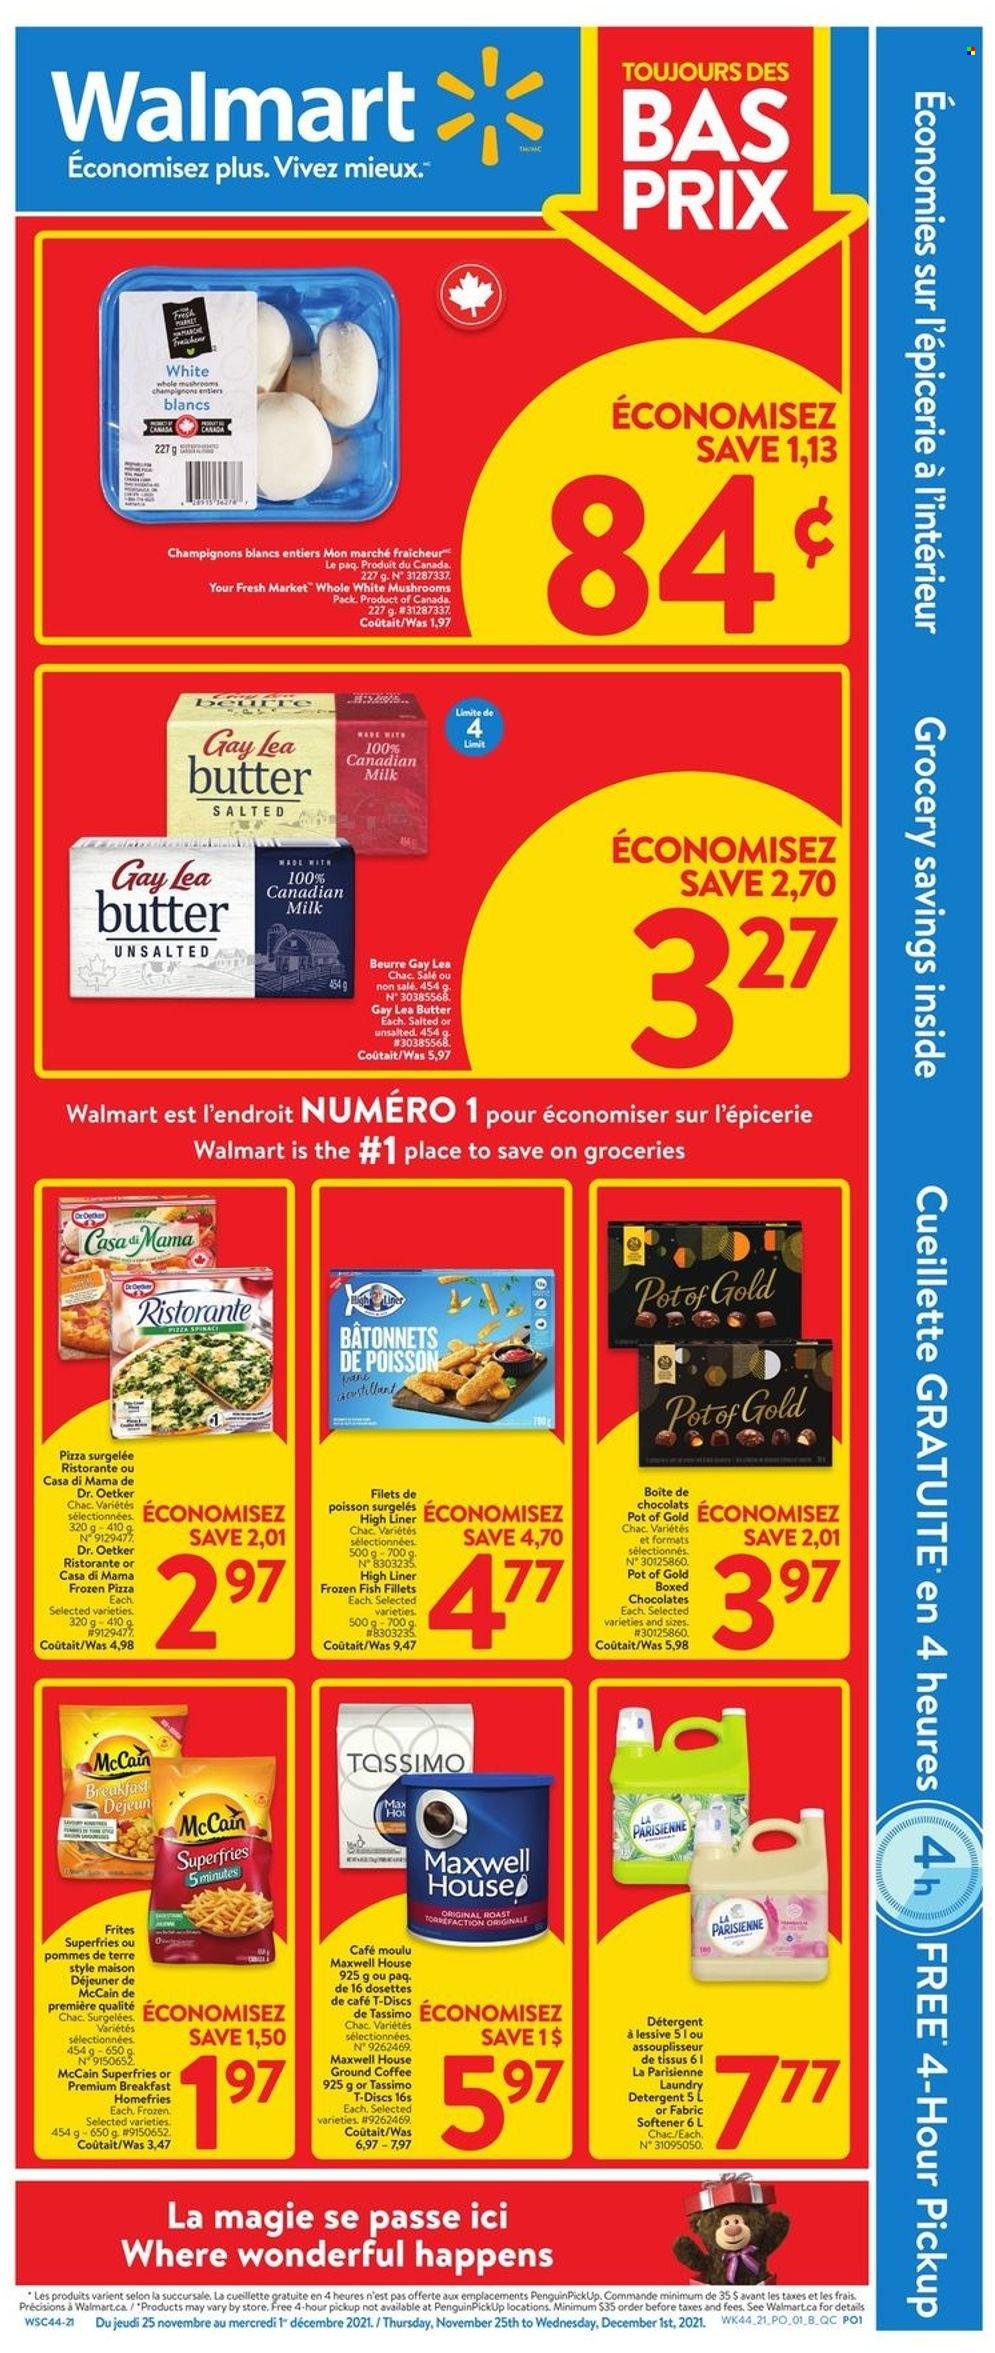 Walmart Flyer - November 25, 2021 - December 01, 2021 - Sales products - fish fillets, fish, pizza, Dr. Oetker, milk, butter, McCain, potato fries, chocolate, Maxwell House, coffee, ground coffee, fabric softener, laundry detergent, pot, PREMIERE, detergent. Page 1.